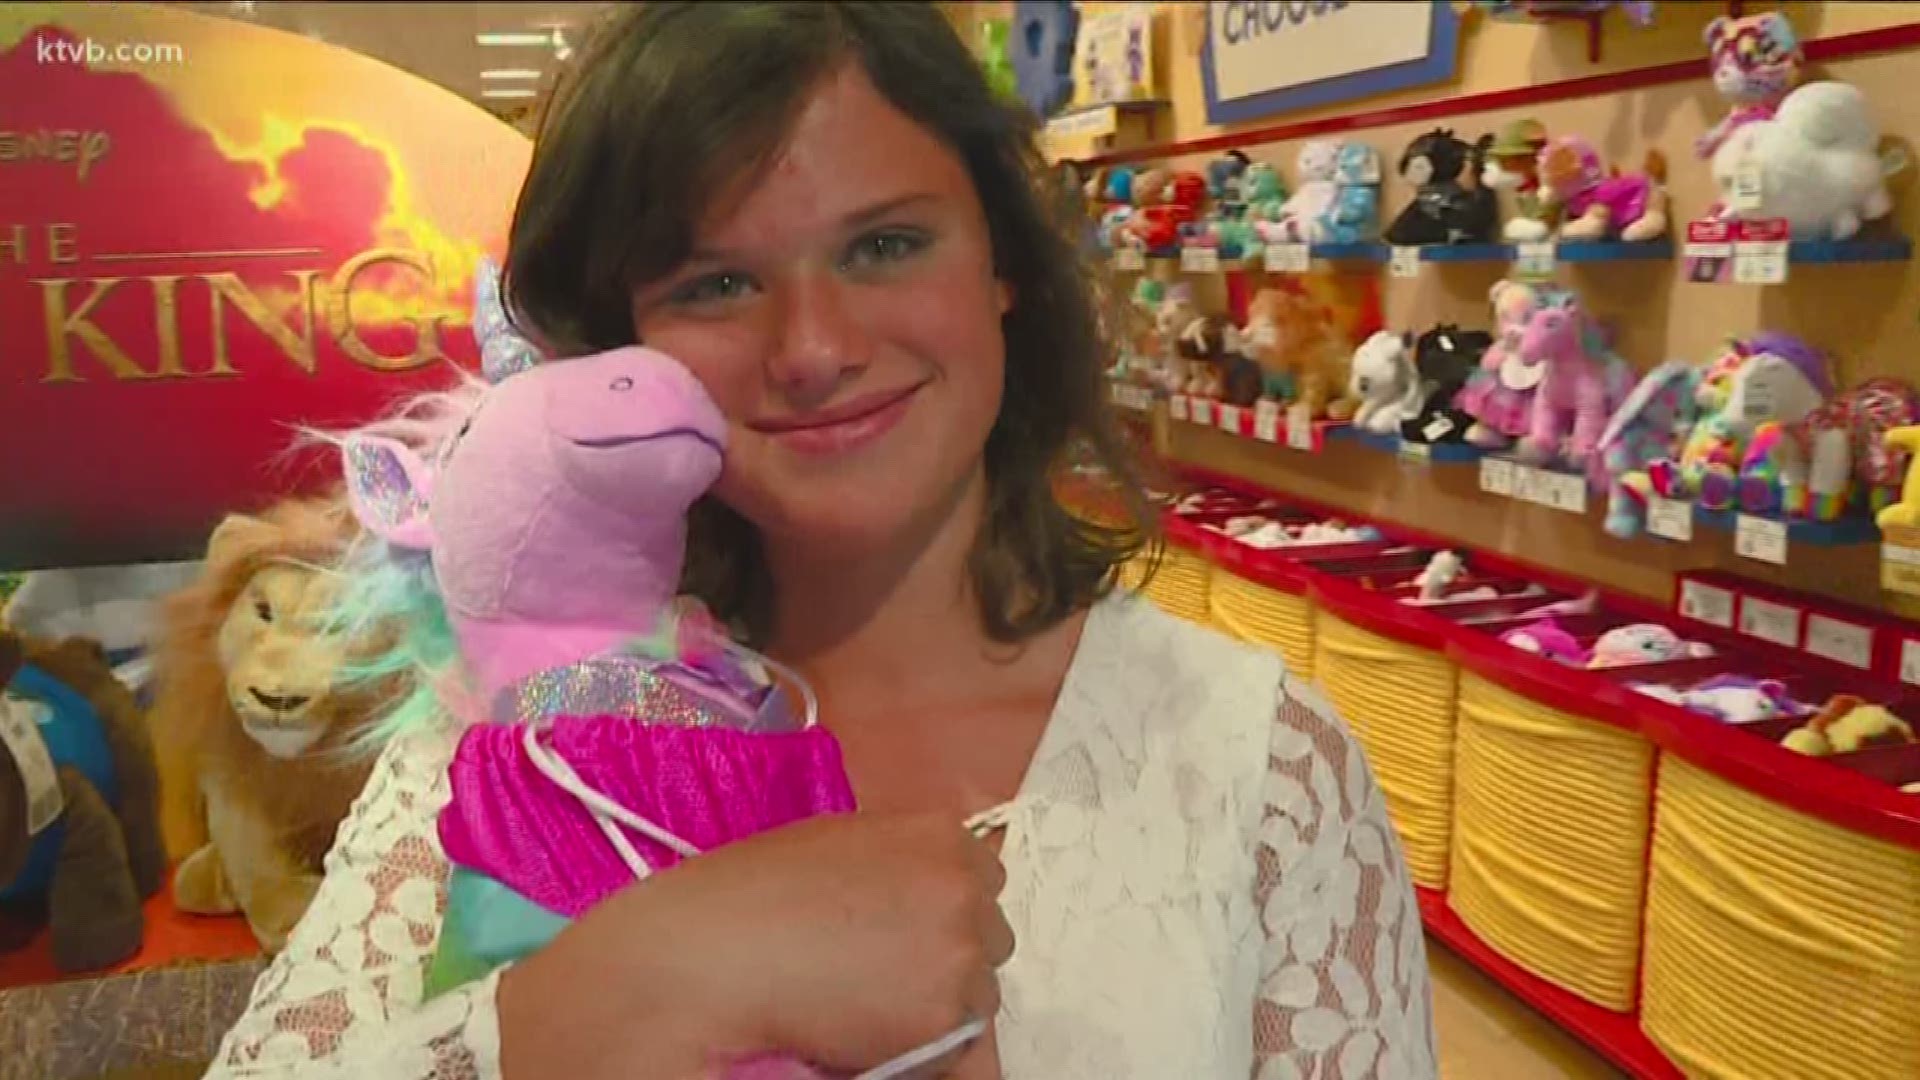 Most kids love stuffed animals, and Leanne is no different. So we visited the Build-A-Bear workshop at Boise Towne Square to get to know this girl who is looking for a great home.